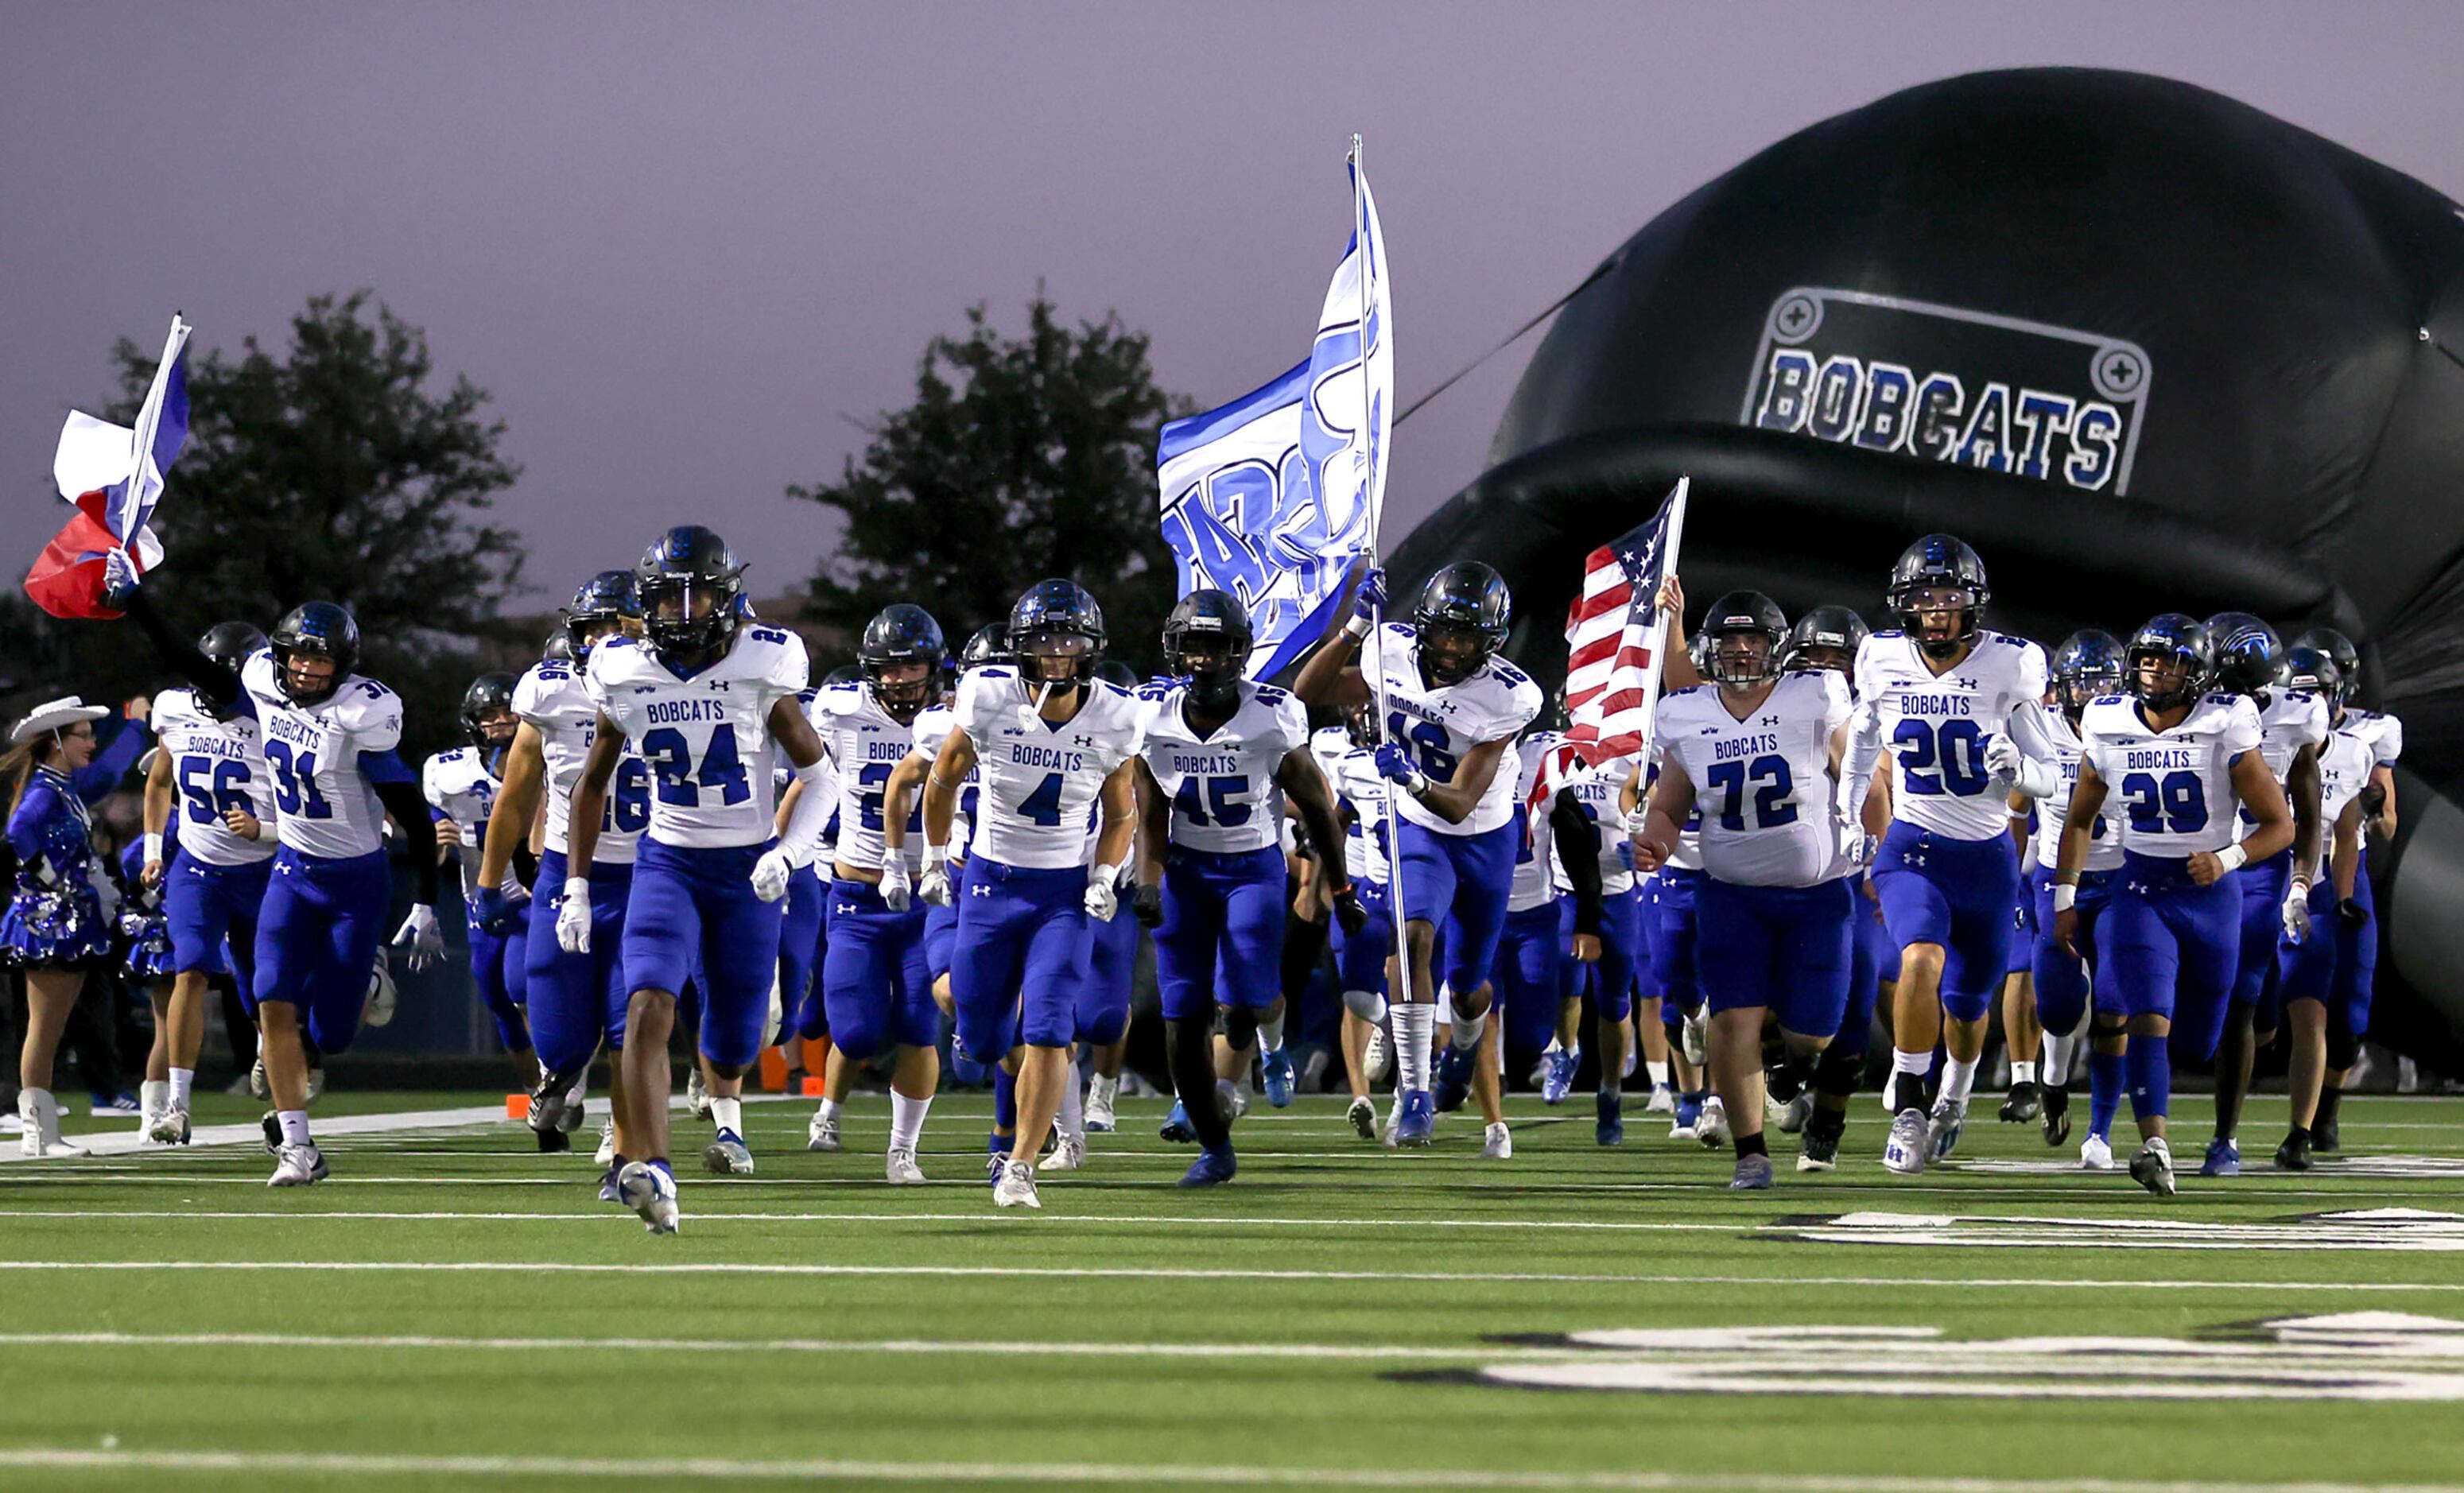 The Byron Nelson Bobcats enter the field to face Keller in a District 4-6A high school...